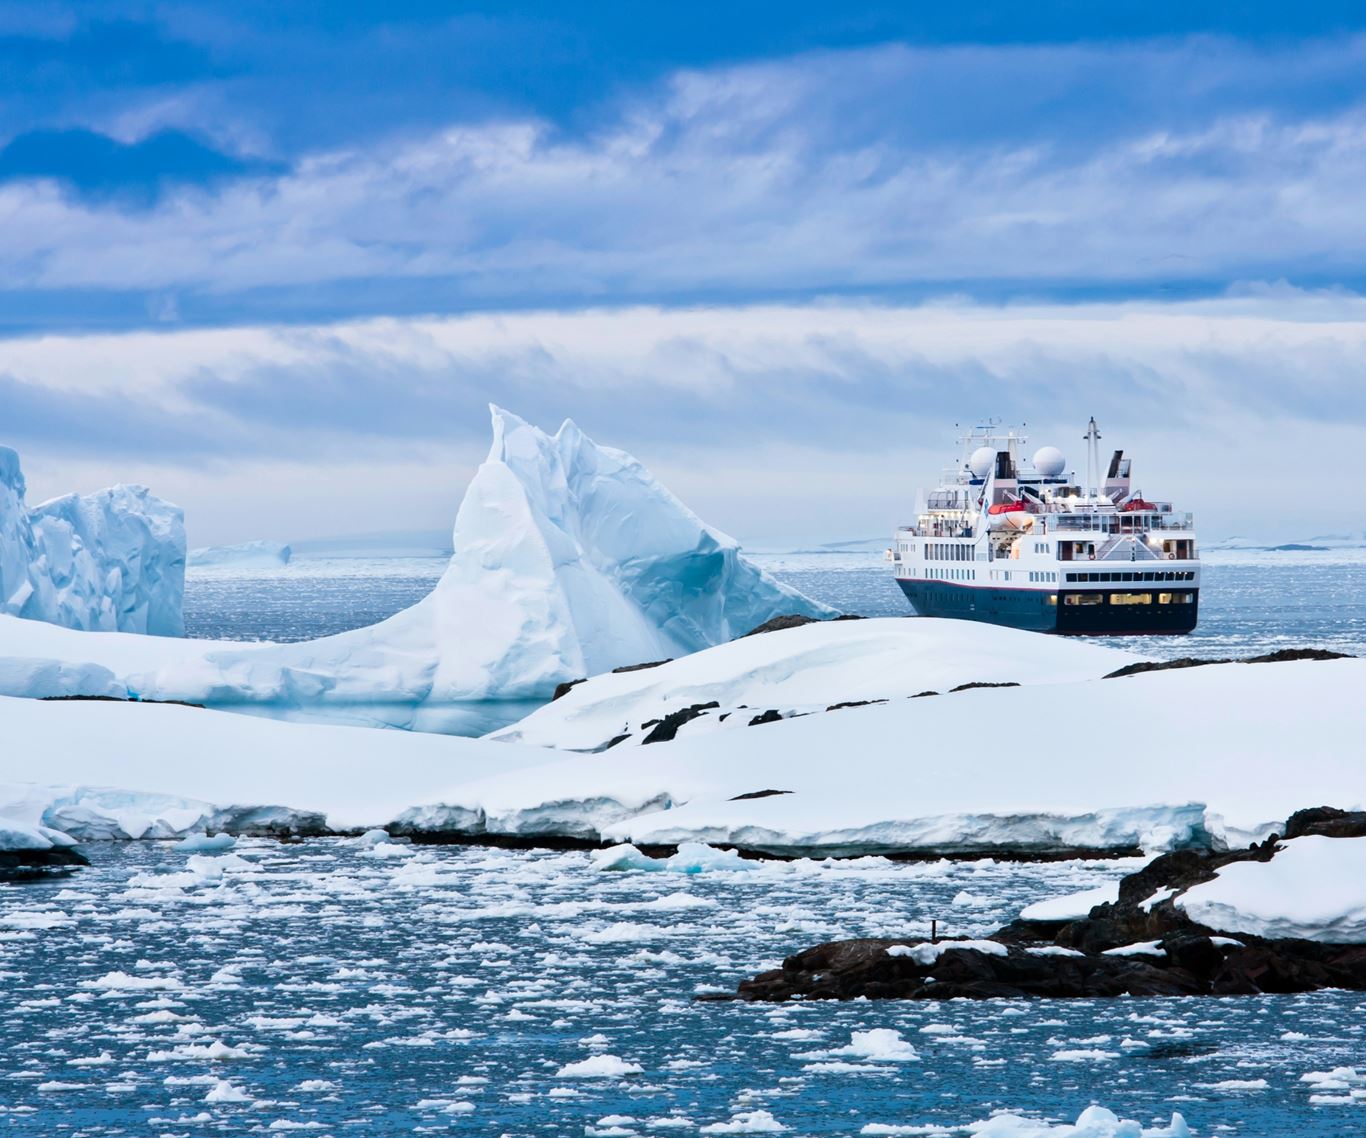 **Antarctica** This remote destination is the ultimate in cruising – starting with the daunting crossing of Drake Passage. The reward is a pristine continent of snow-capped mountains, glaciers and drifting icebergs inhabited by whales, seals and astounding colonies of penguins. The Falkland and South Georgia islands are dense in seabirds. *Recommended: [The Ultimate Antarctic Adventure](https://www.scenic.com.au/tour/the-ultimate-antarctic-adventure/2546) by [cruises.com.au](http://www.cruises.com.au/).*: [object Object]